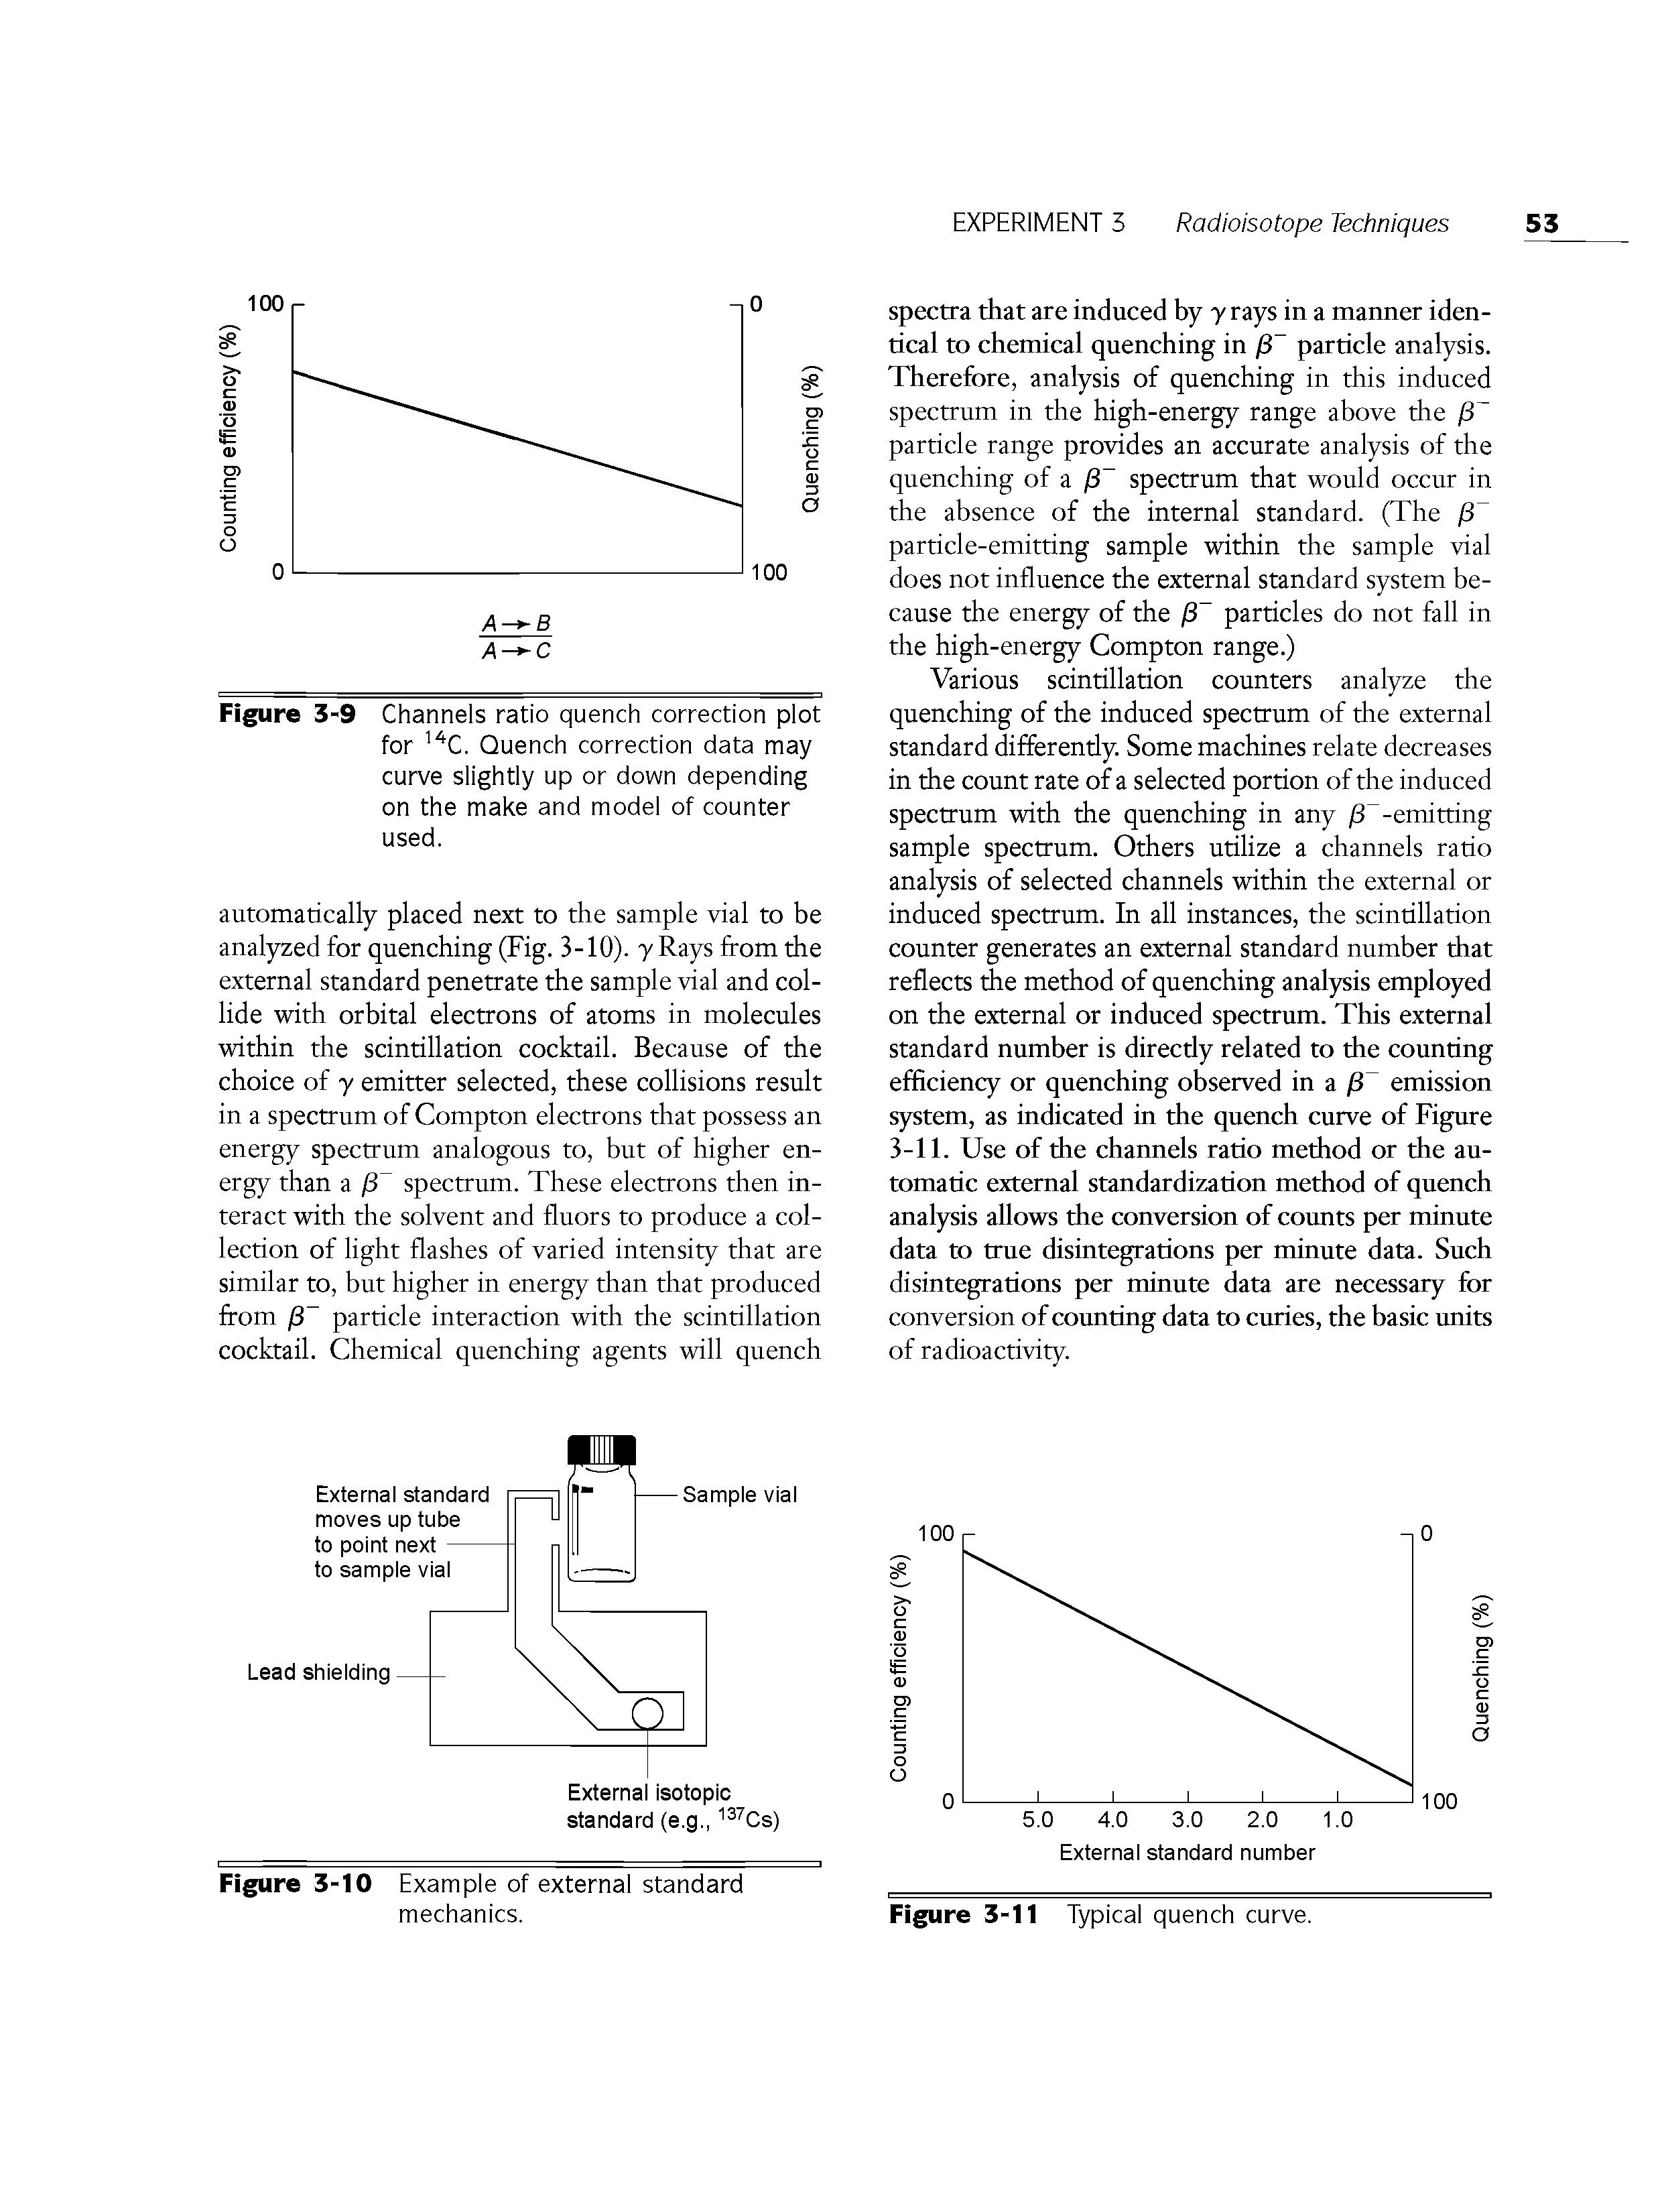 Figure 3-9 Channels ratio quench correction plot for 14C. Quench correction data may curve slightly up or down depending on the make and model of counter used.